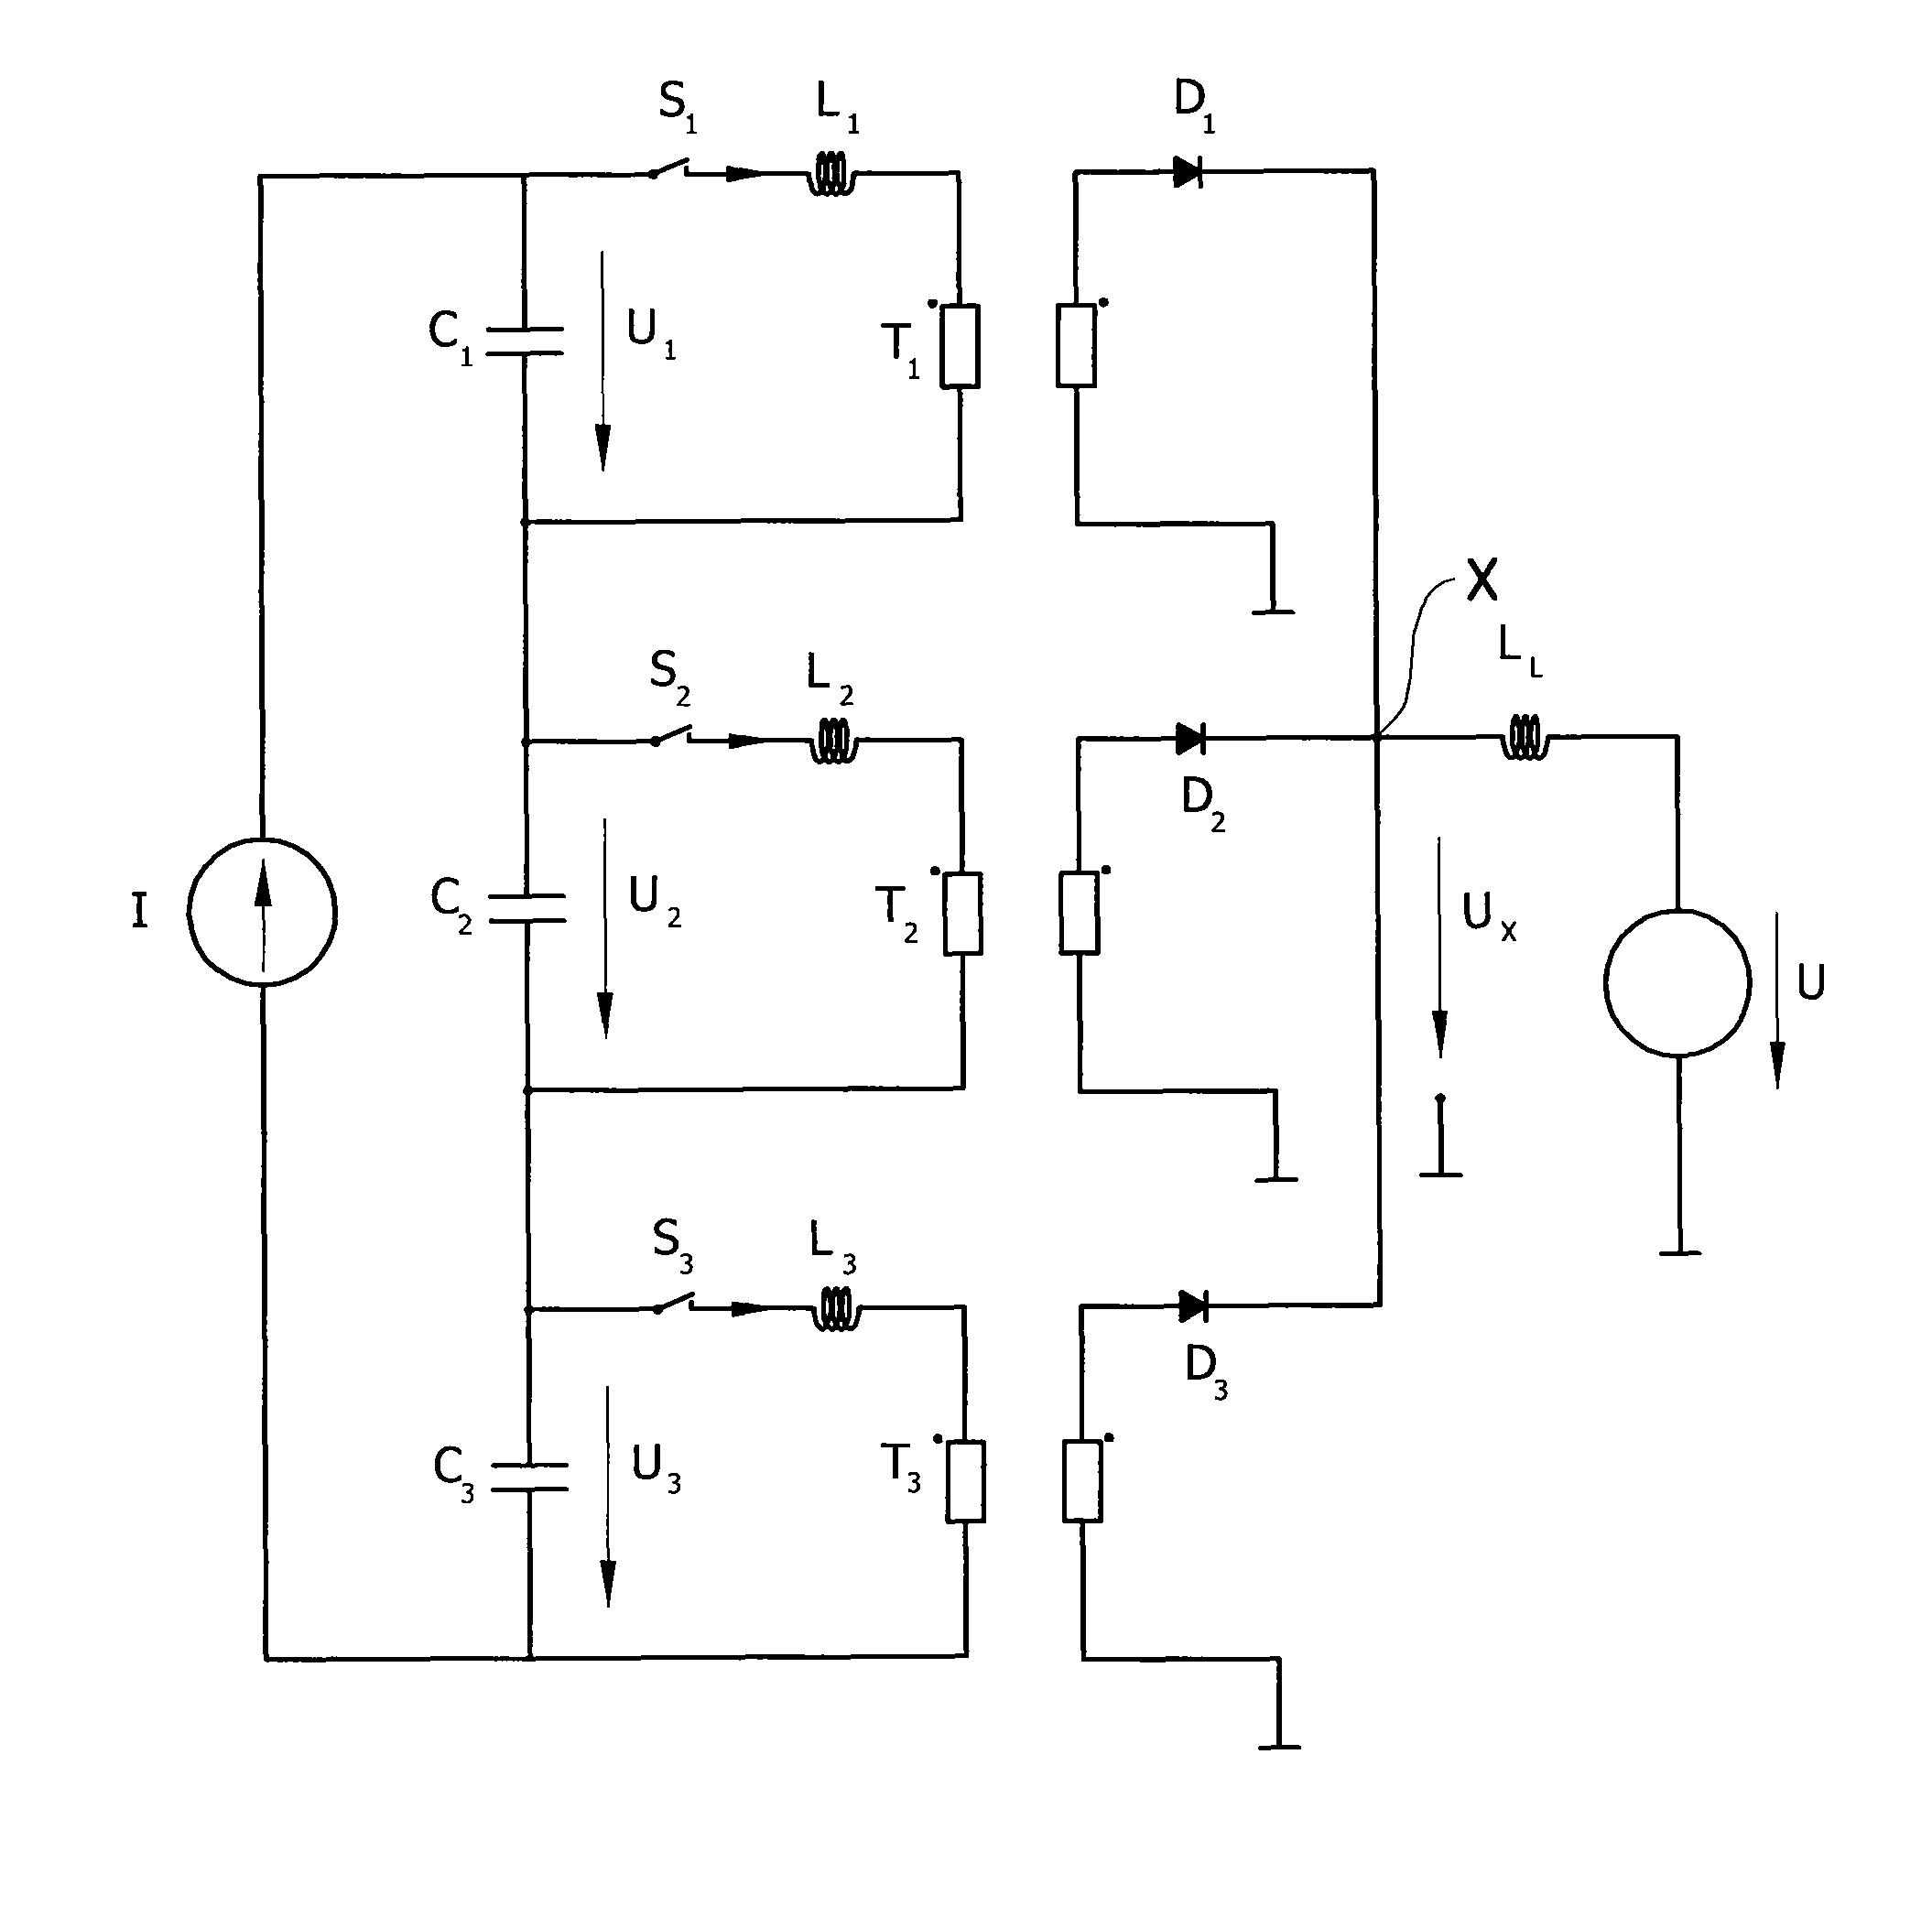 Multiphase soft-switched DC-DC converter